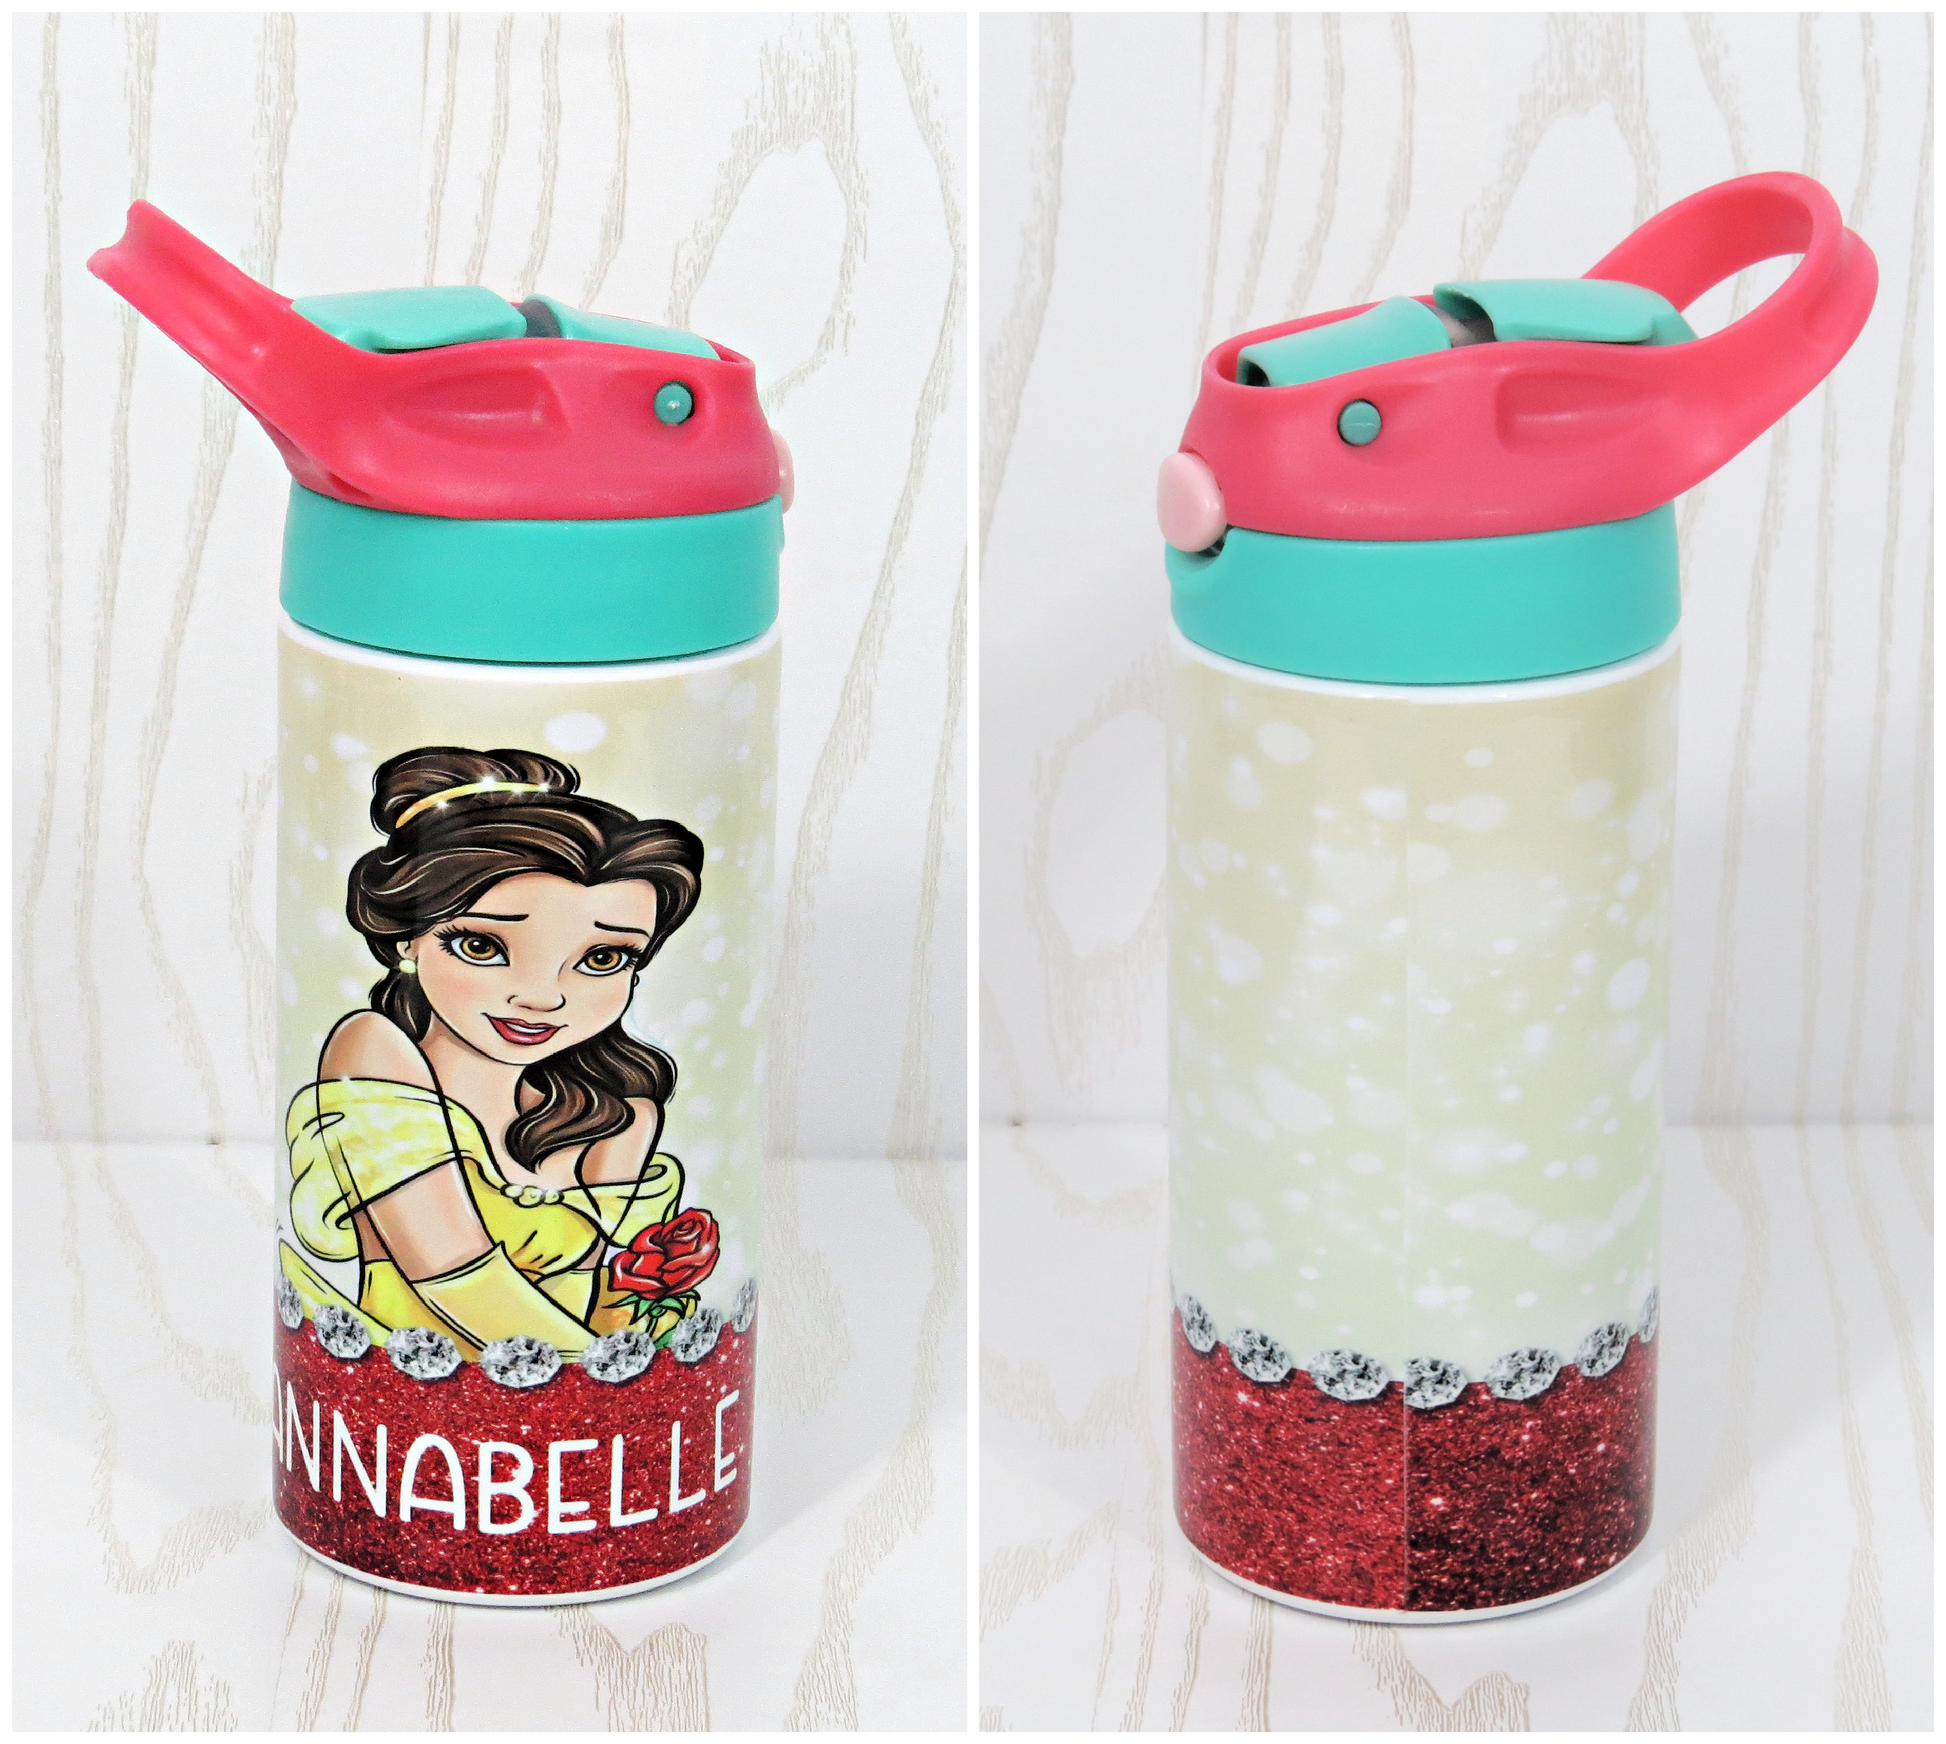 Rapunzel' Insulated Stainless Steel Water Bottle